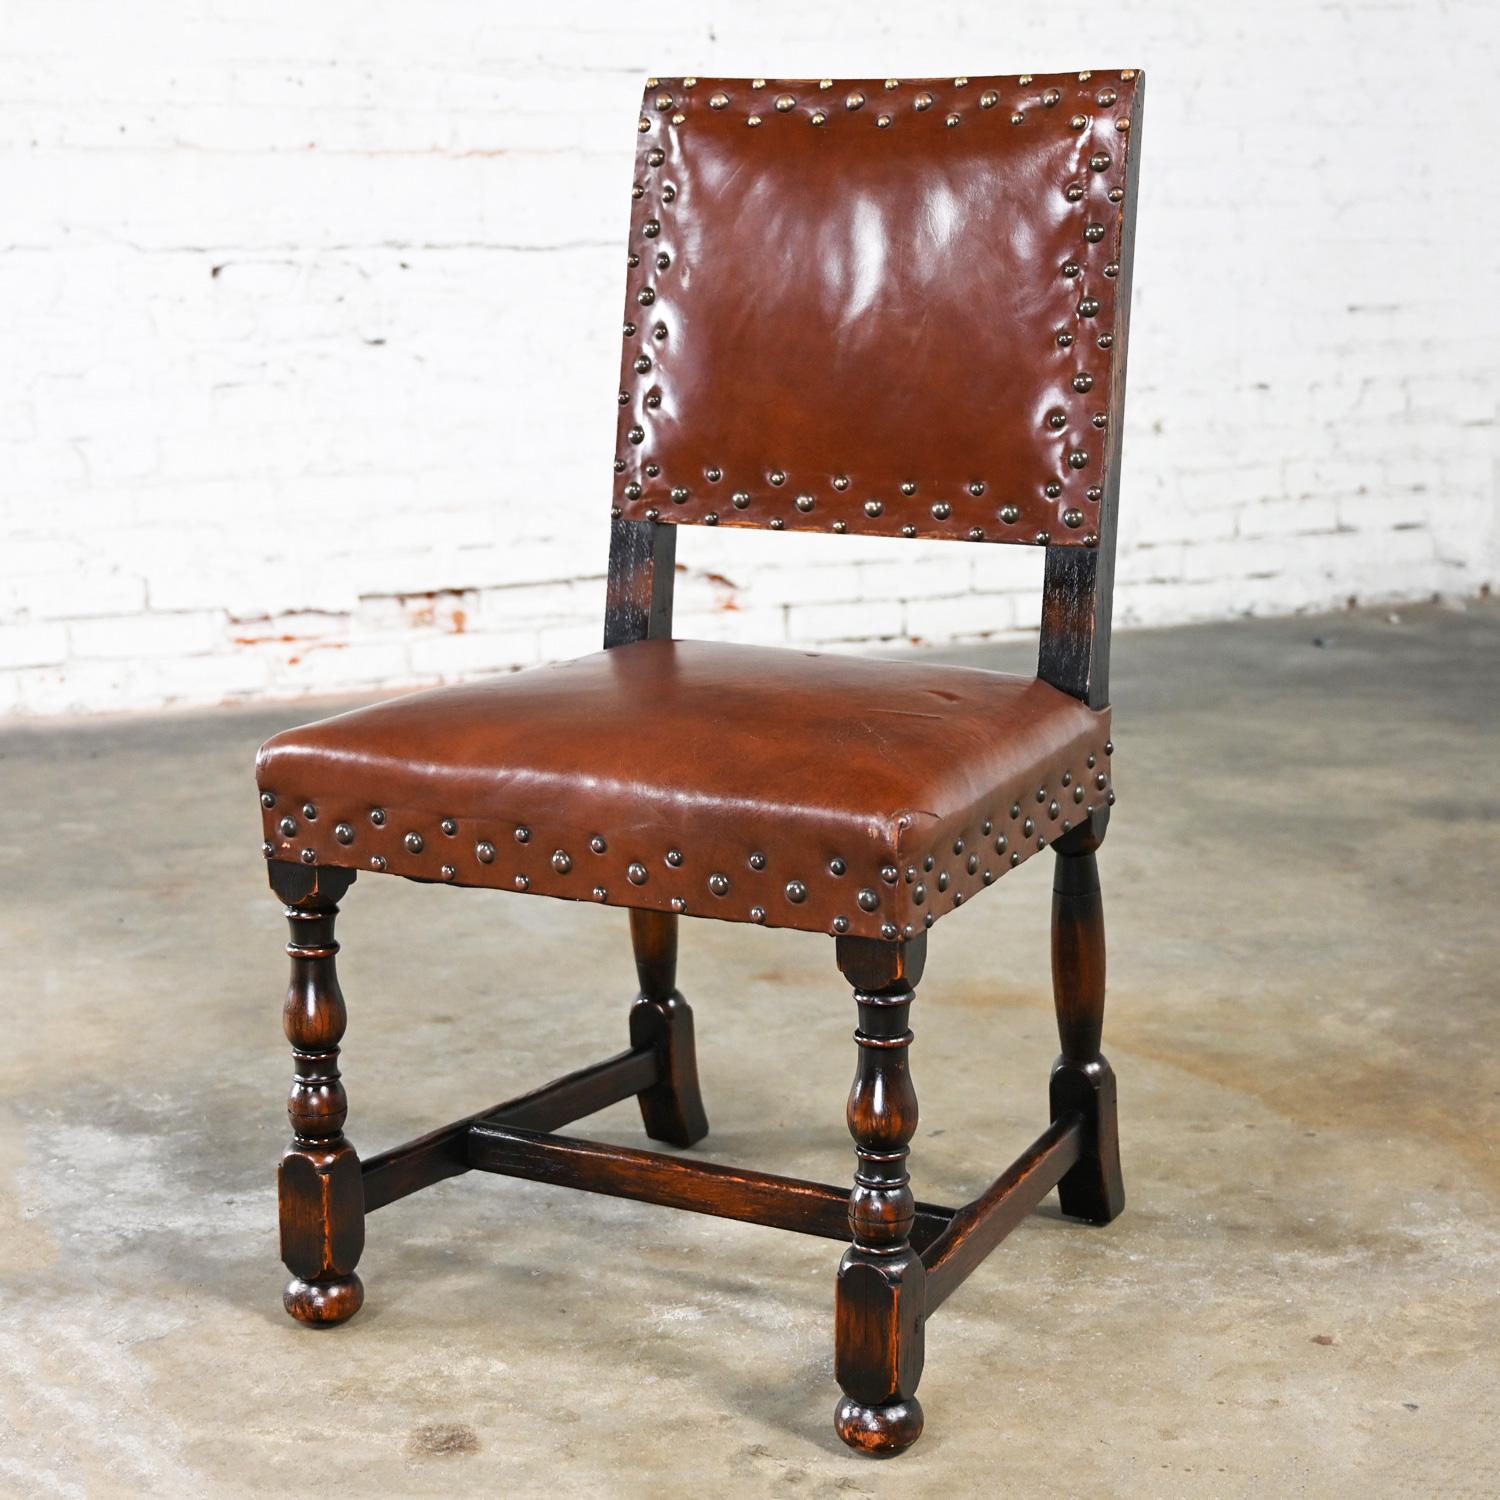 Spanish Colonial Spanish Revival Century Furniture Oak Side Chair Cognac Leather Nailhead Details For Sale